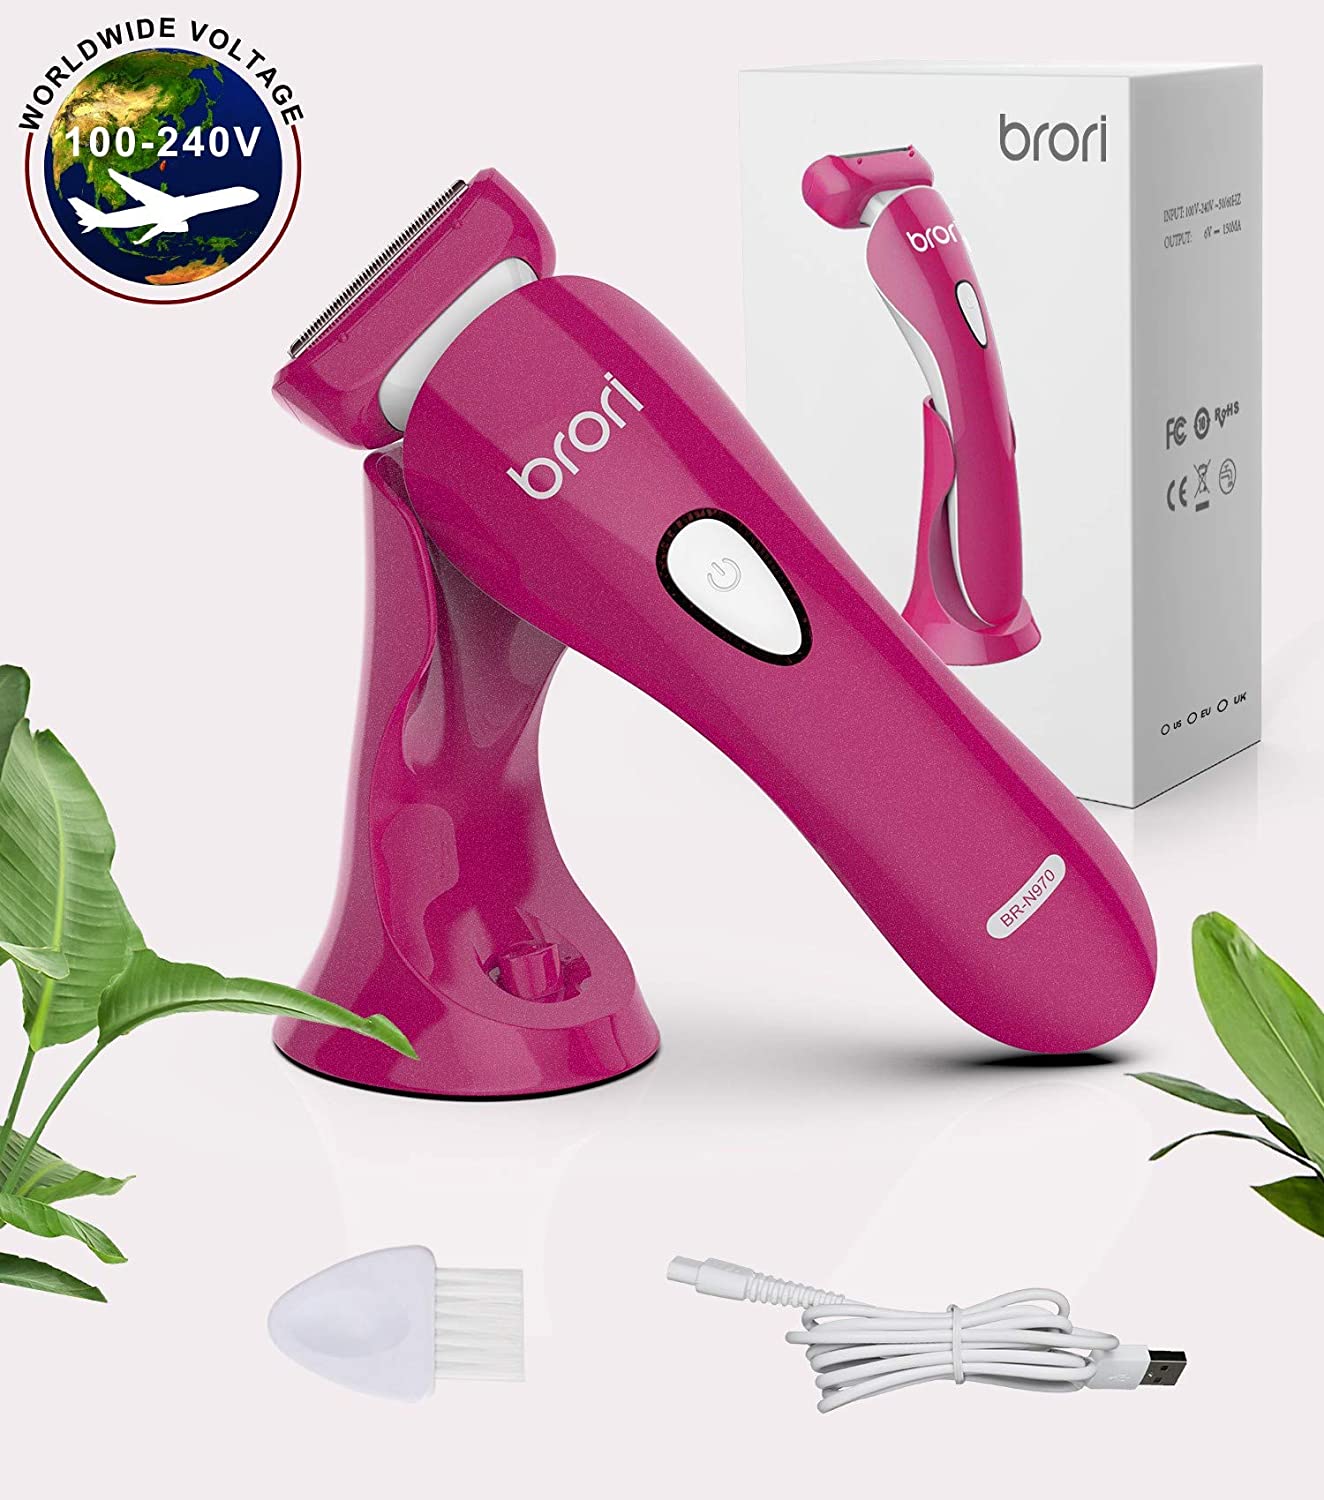 Lady Shaver BR970A